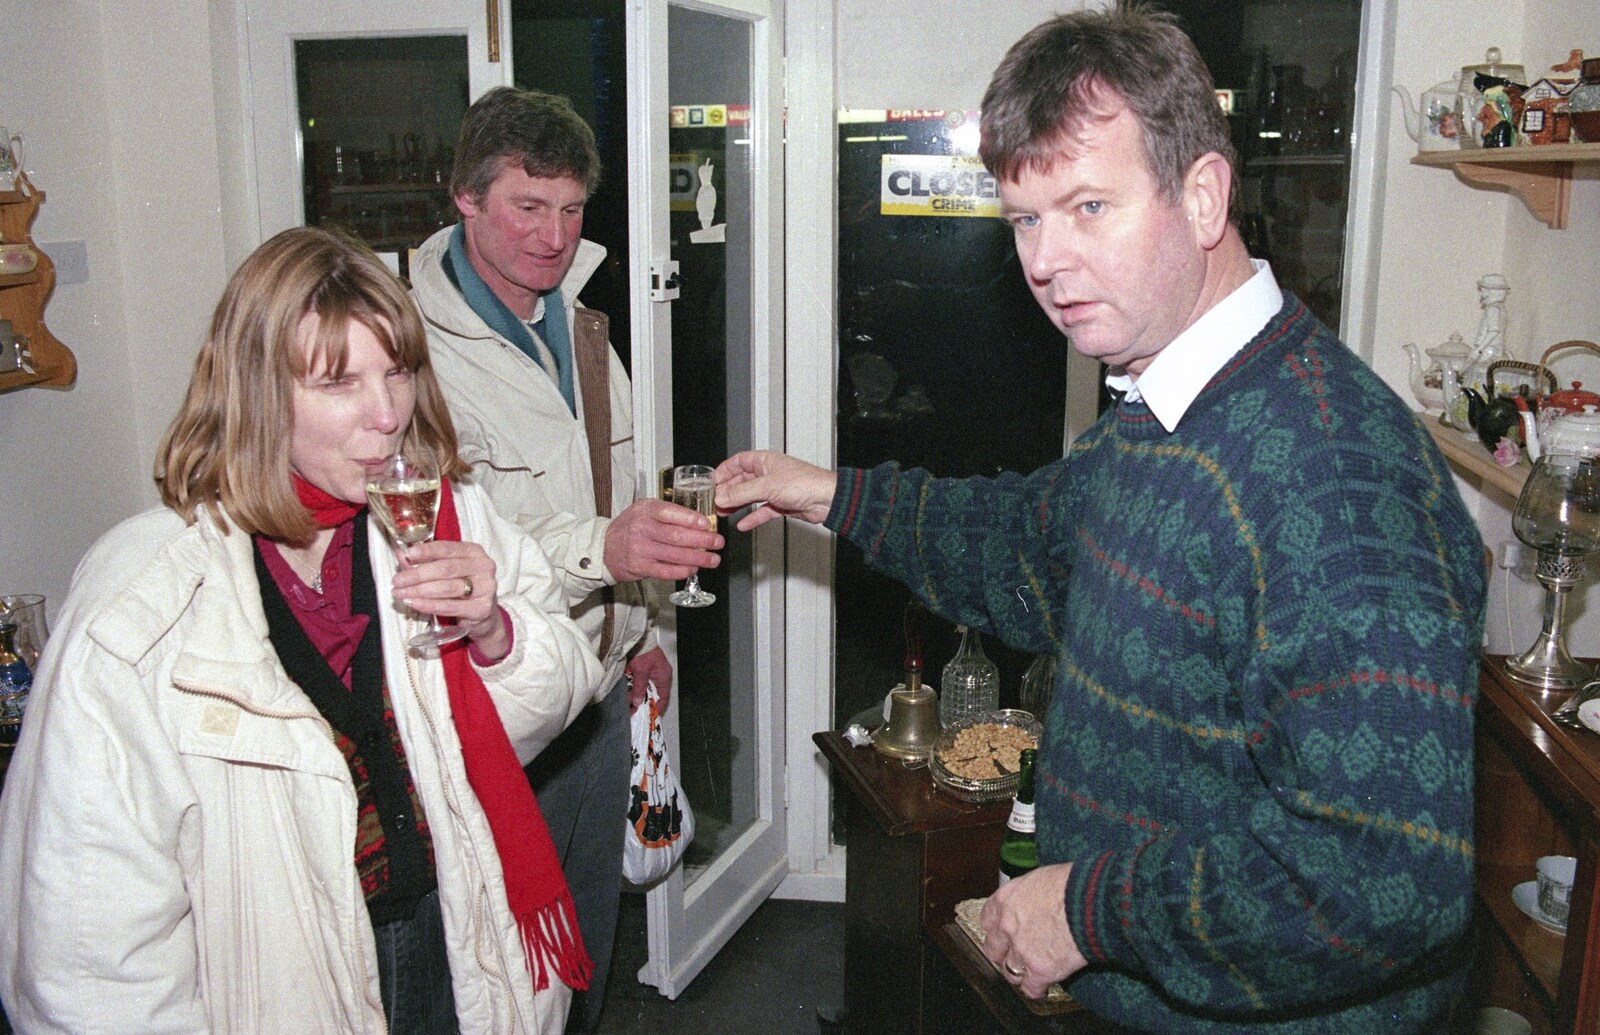 Geoff gets handed a glass of wine from Carol Singing and Late Night Shopping, Stuston, Diss and Harleston, Norfolk - 16th December 1990